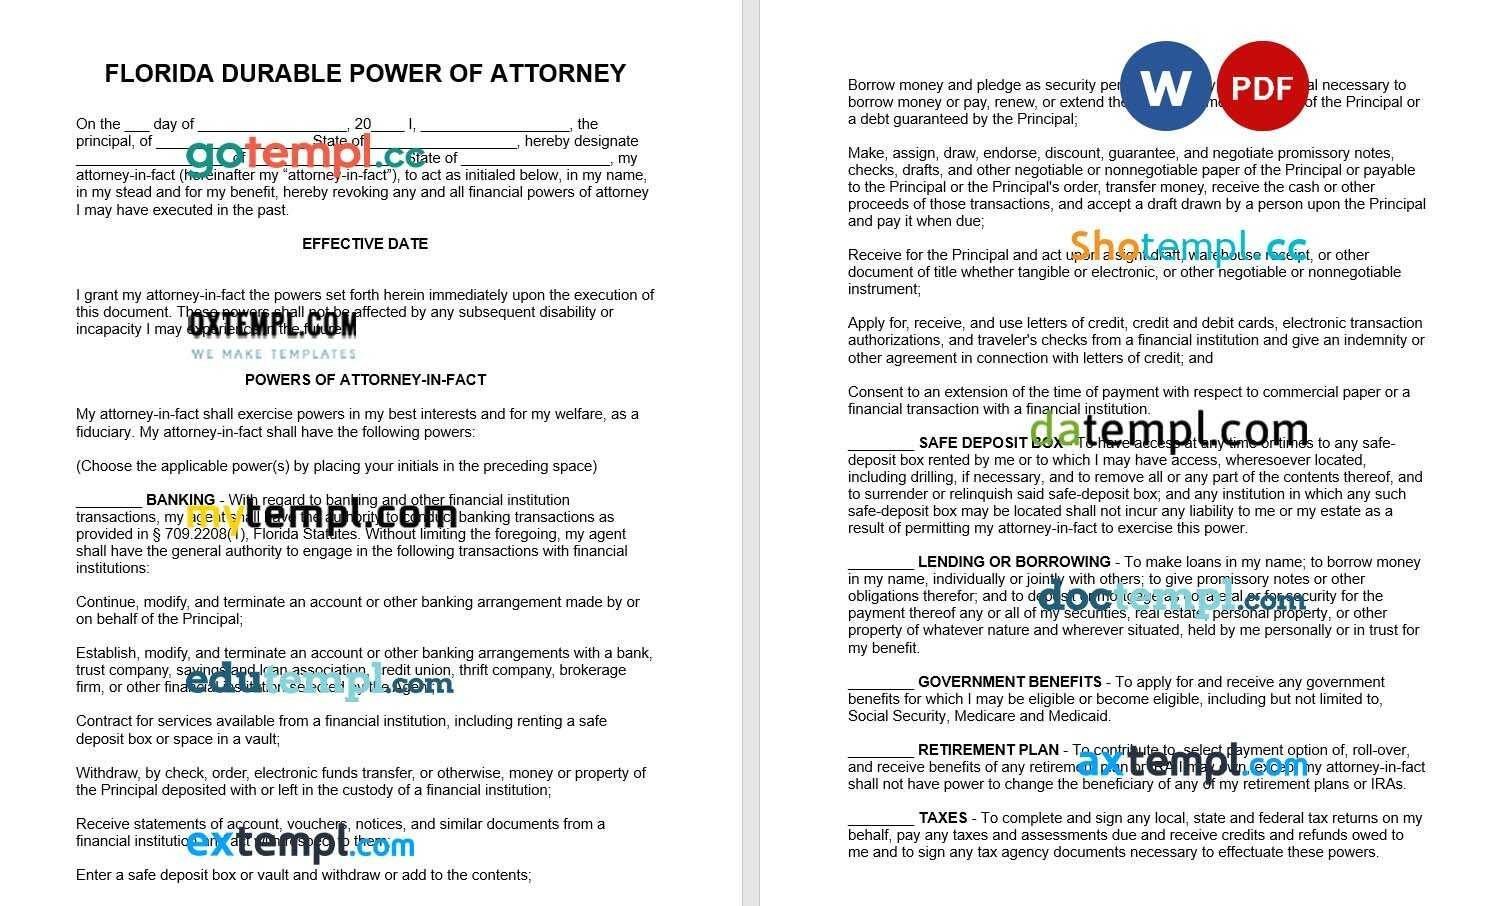 Florida Durable Power of Attorney example, fully editable